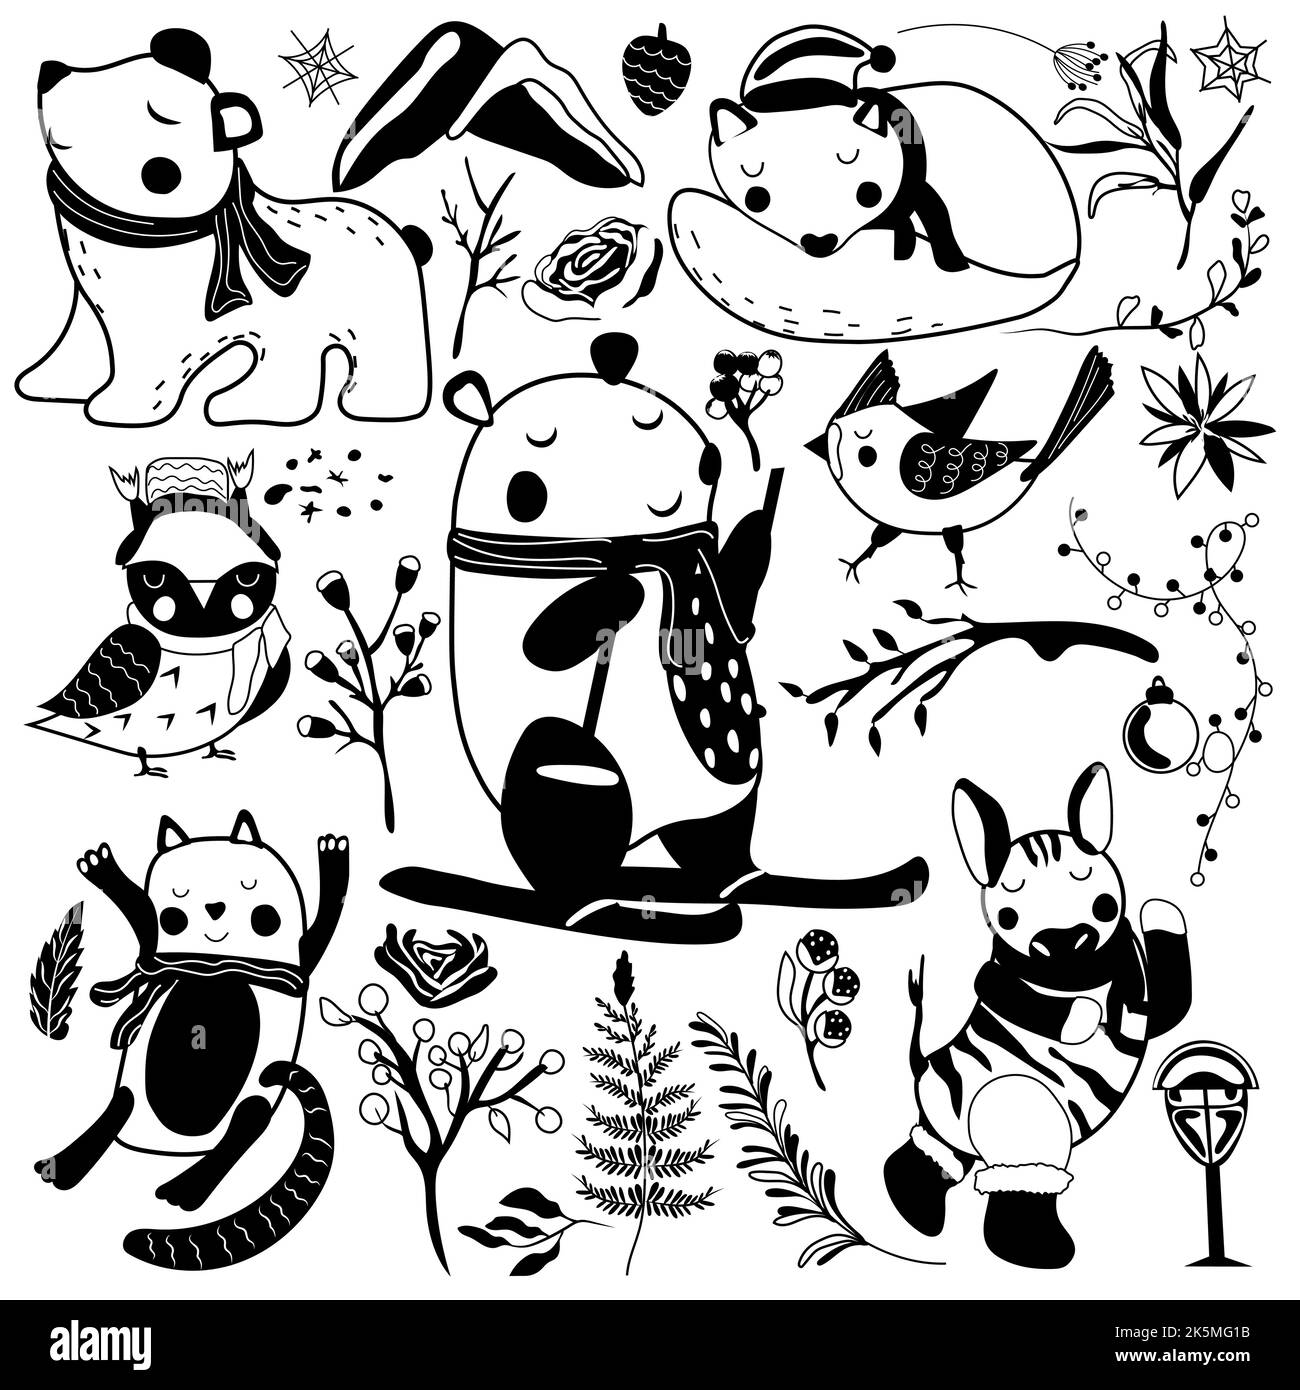 Black and white Magic winter animals, cute bear on skis, sleeping wolf, funny cat, polar bear, winter leaves and flowers. Scandinavian animals. Perfect for greeting cards, poster, postcard, banner. Stock Vector